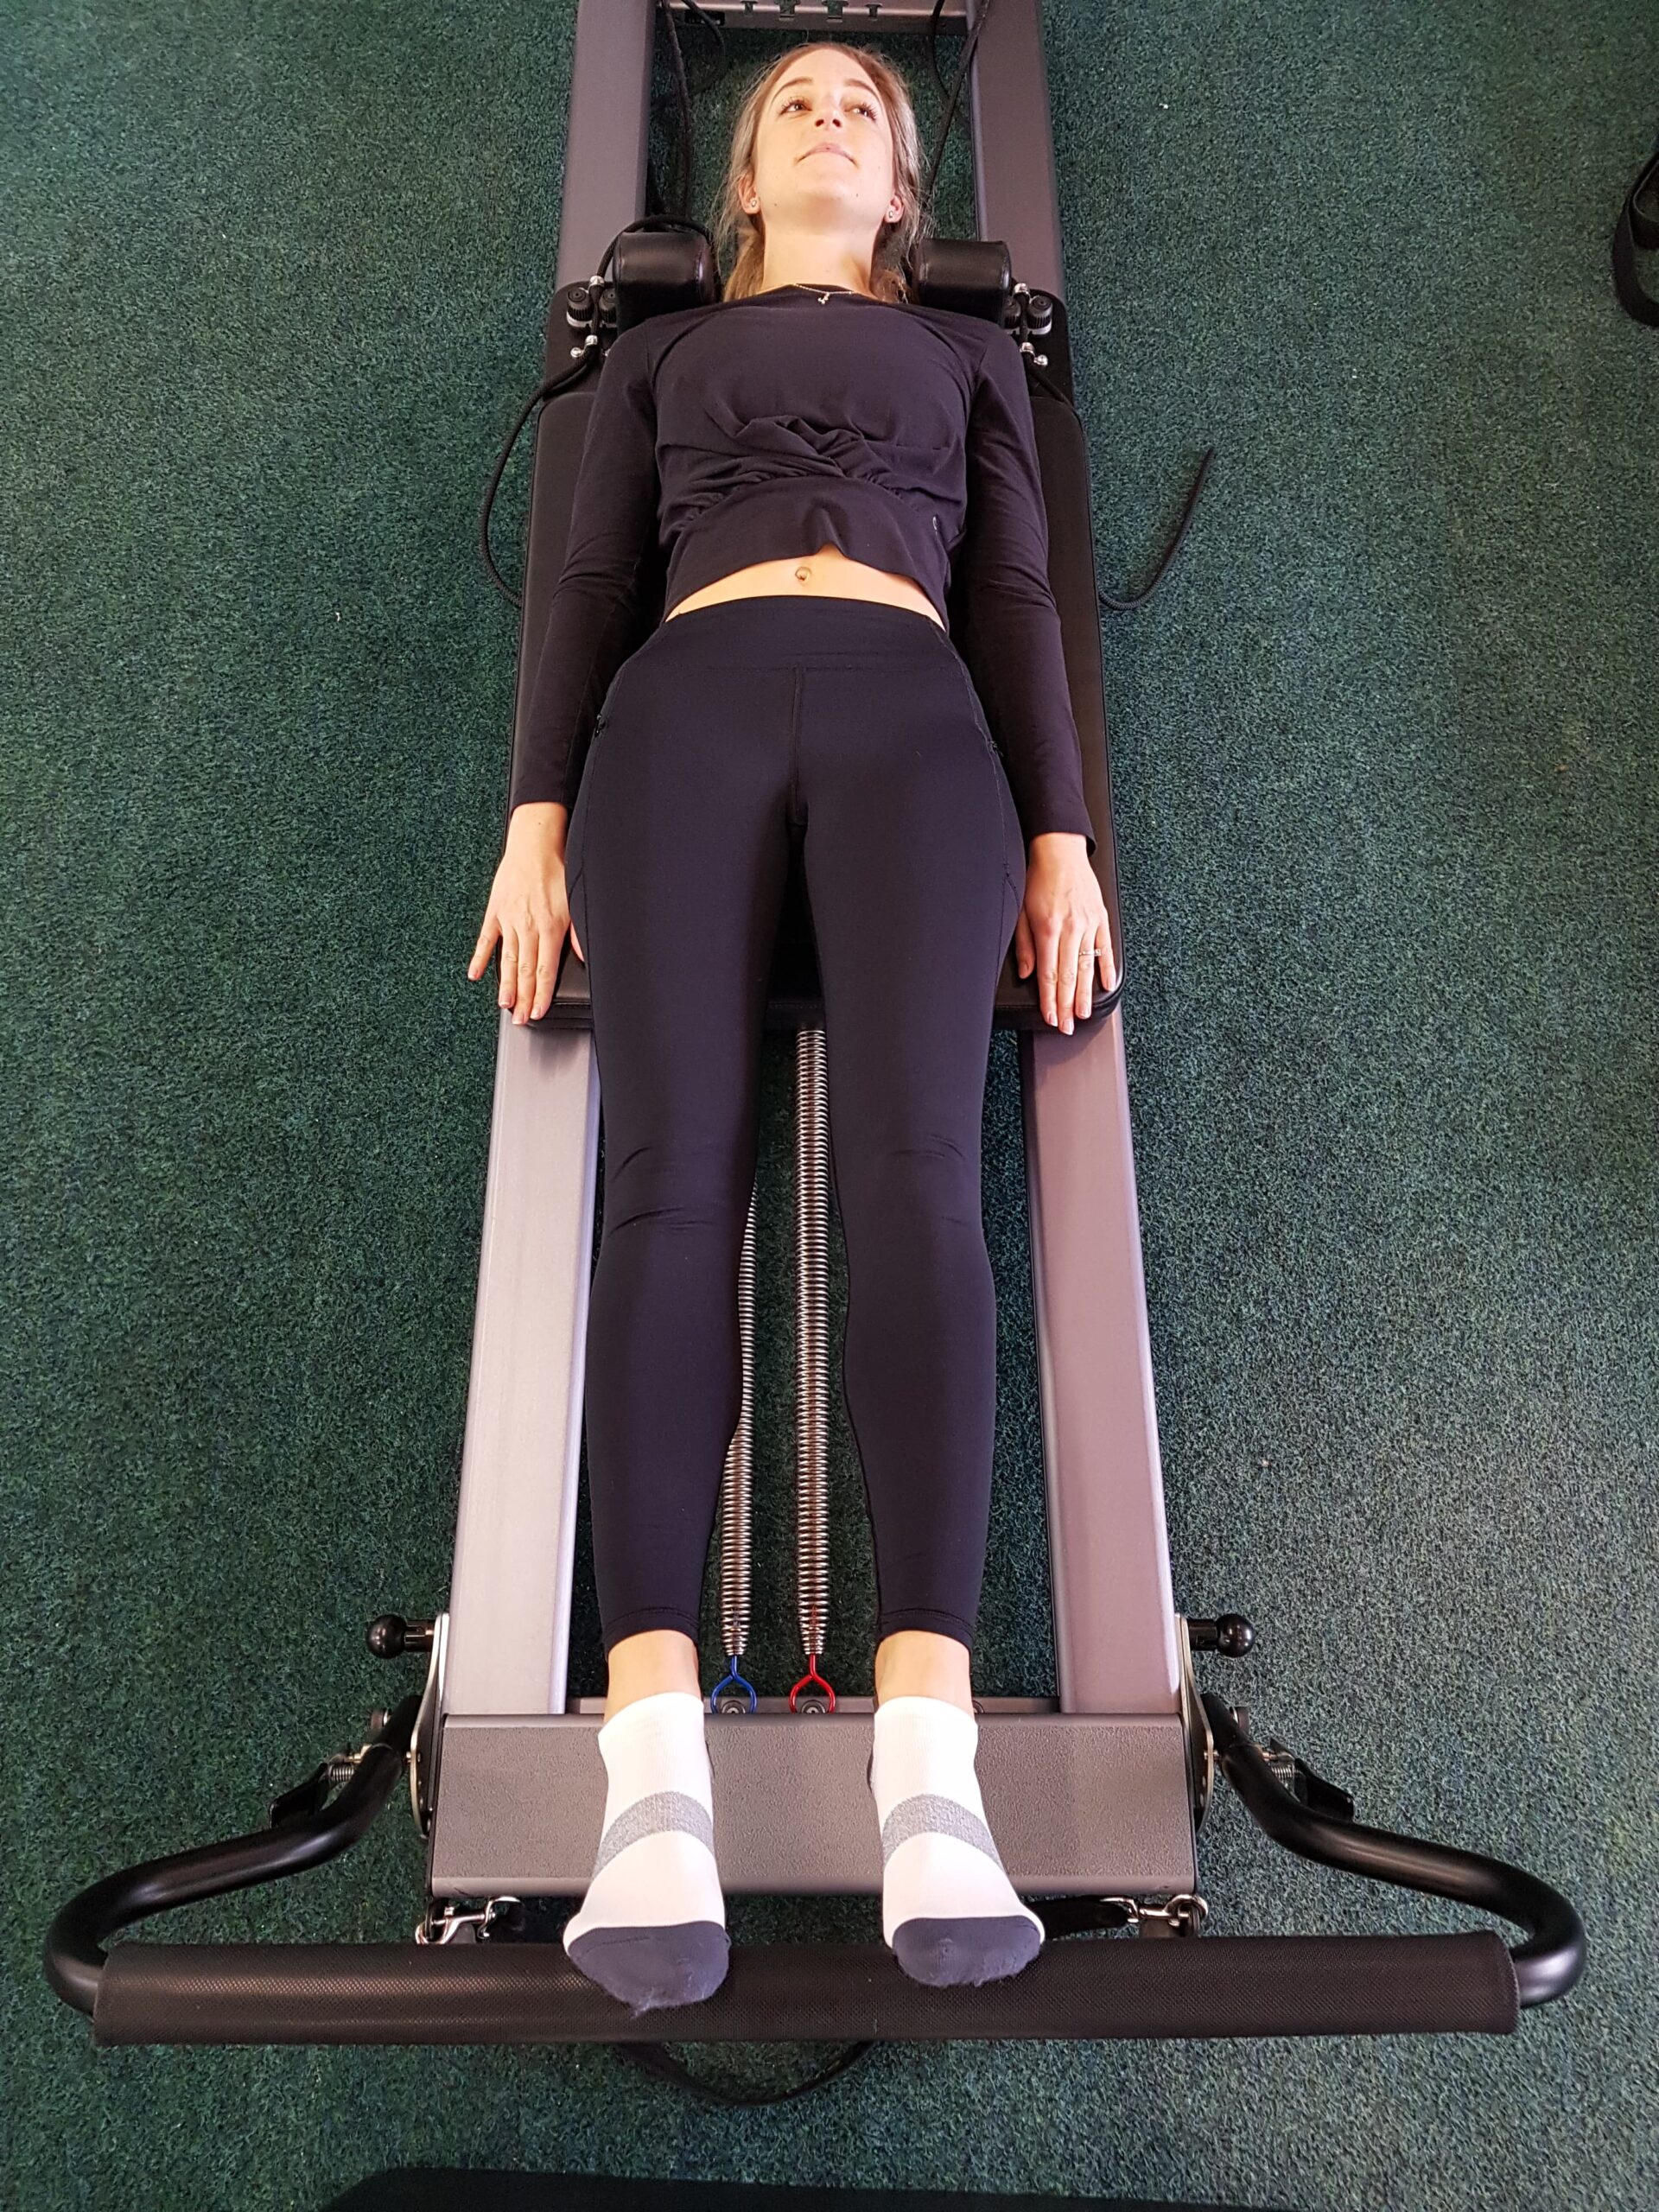 Reformer: Footwork how to